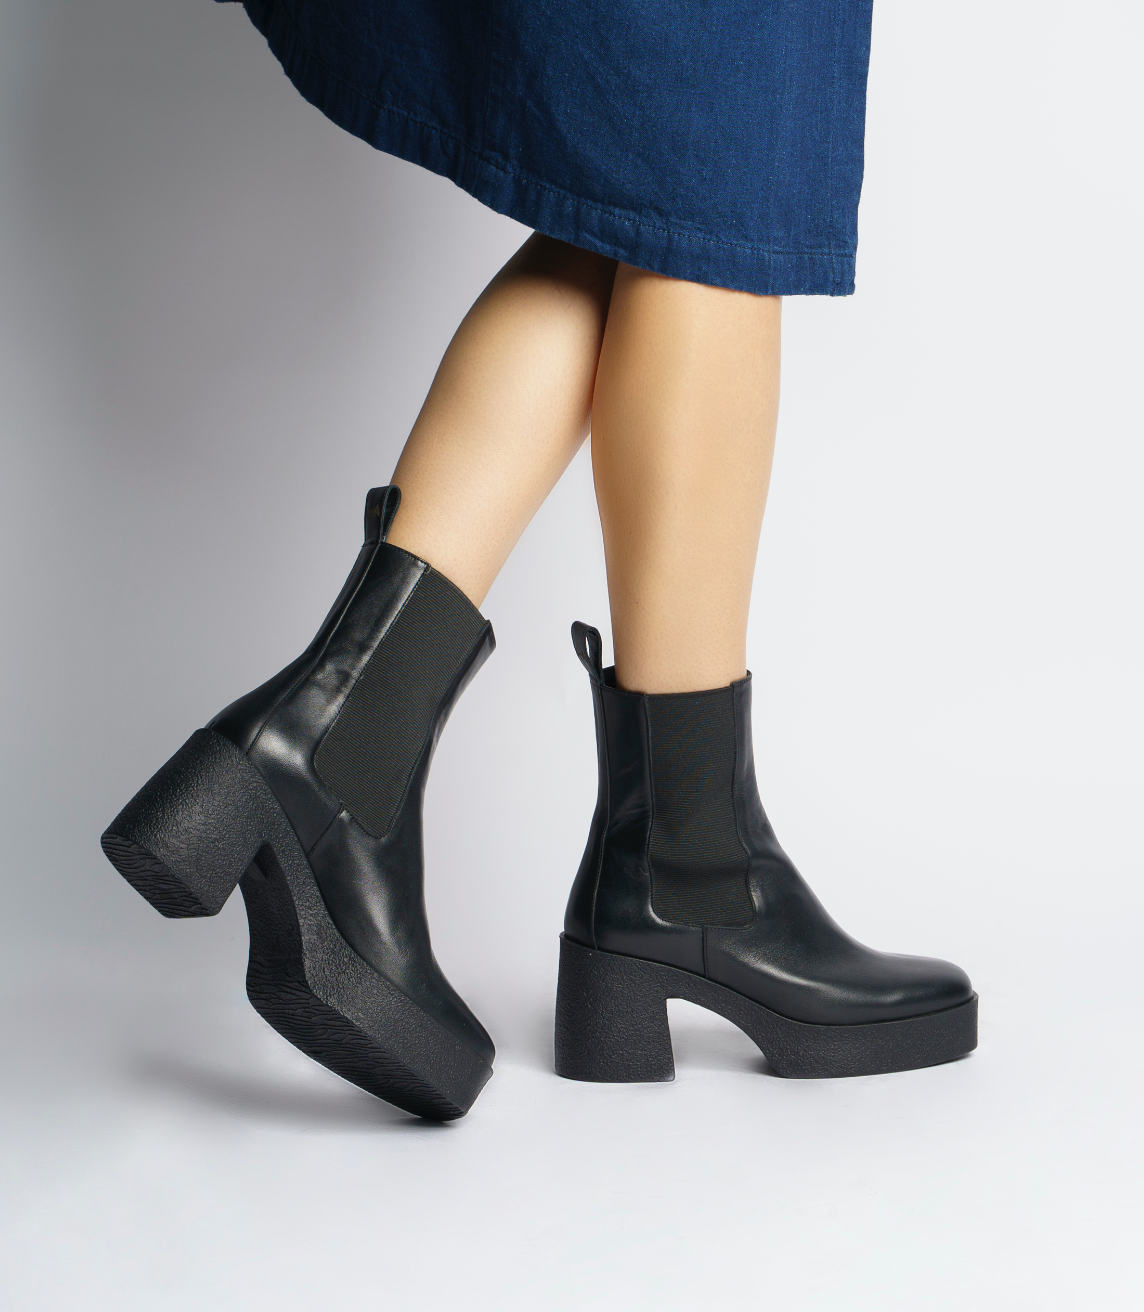 Momo Black Leather Chelsea Boots 20077-04-01 - 2